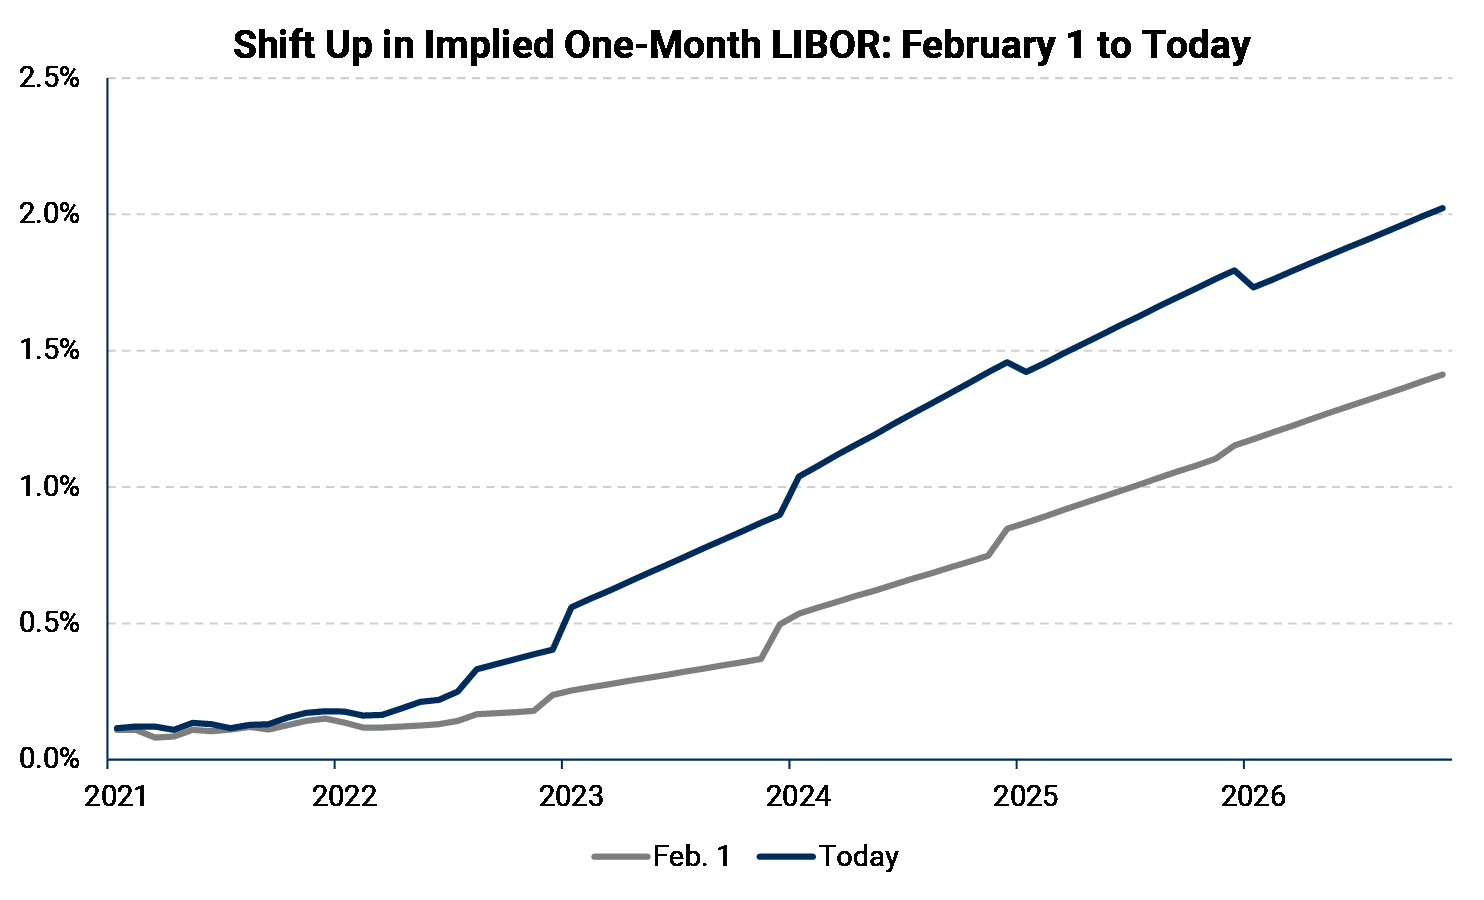 One Month LIBOR Shift